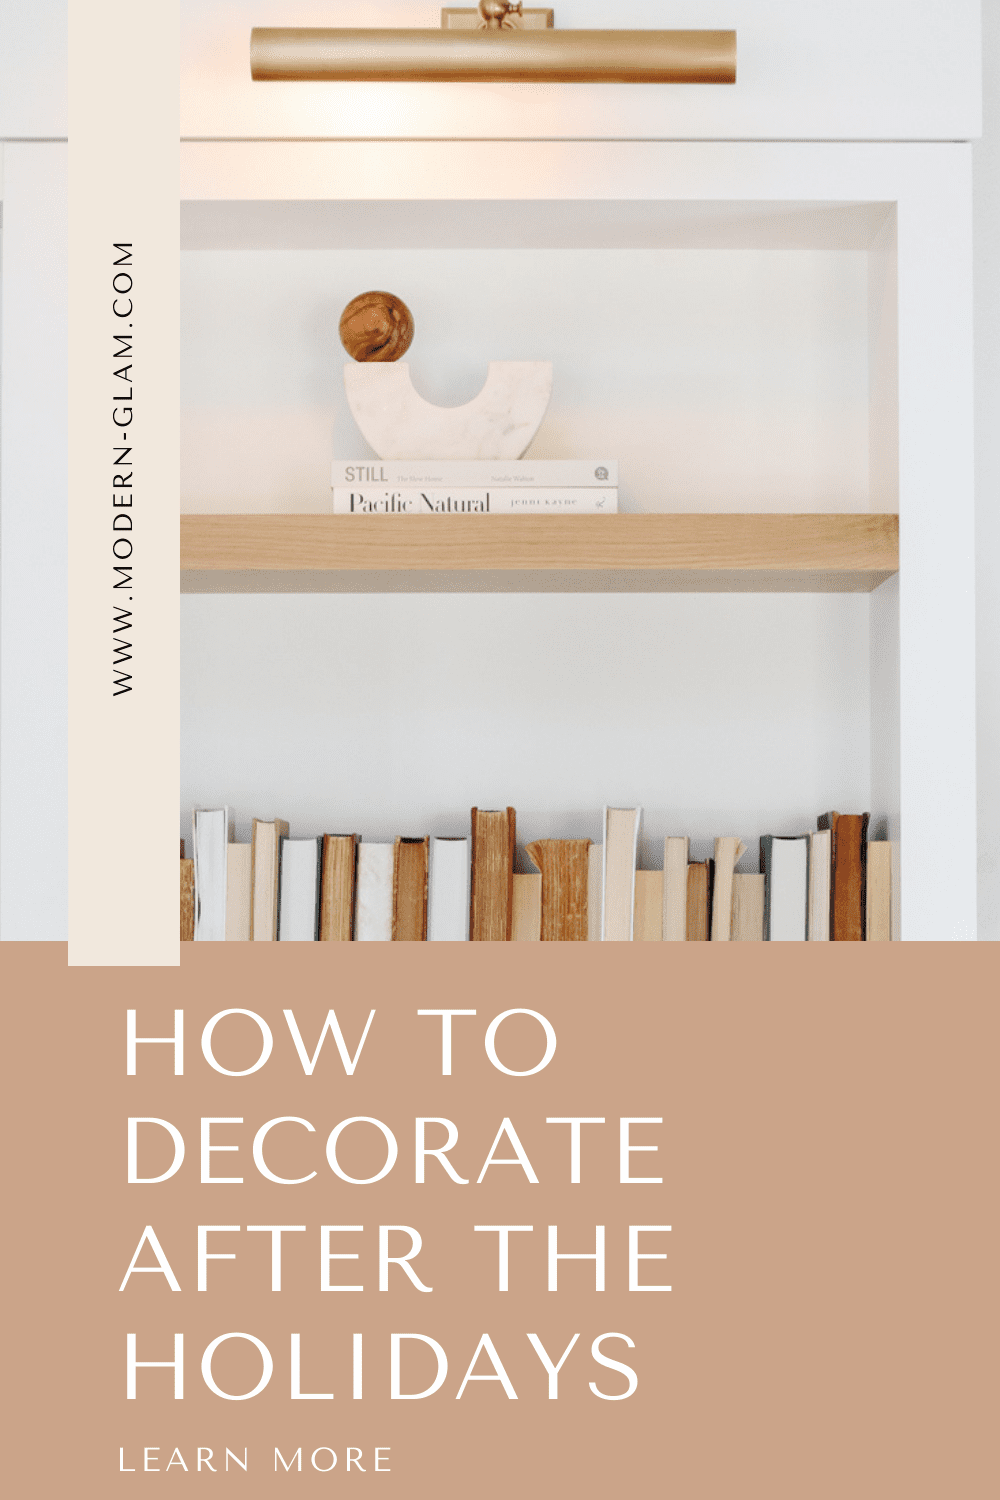 Winter Decorating Ideas For January via @modernglamhome